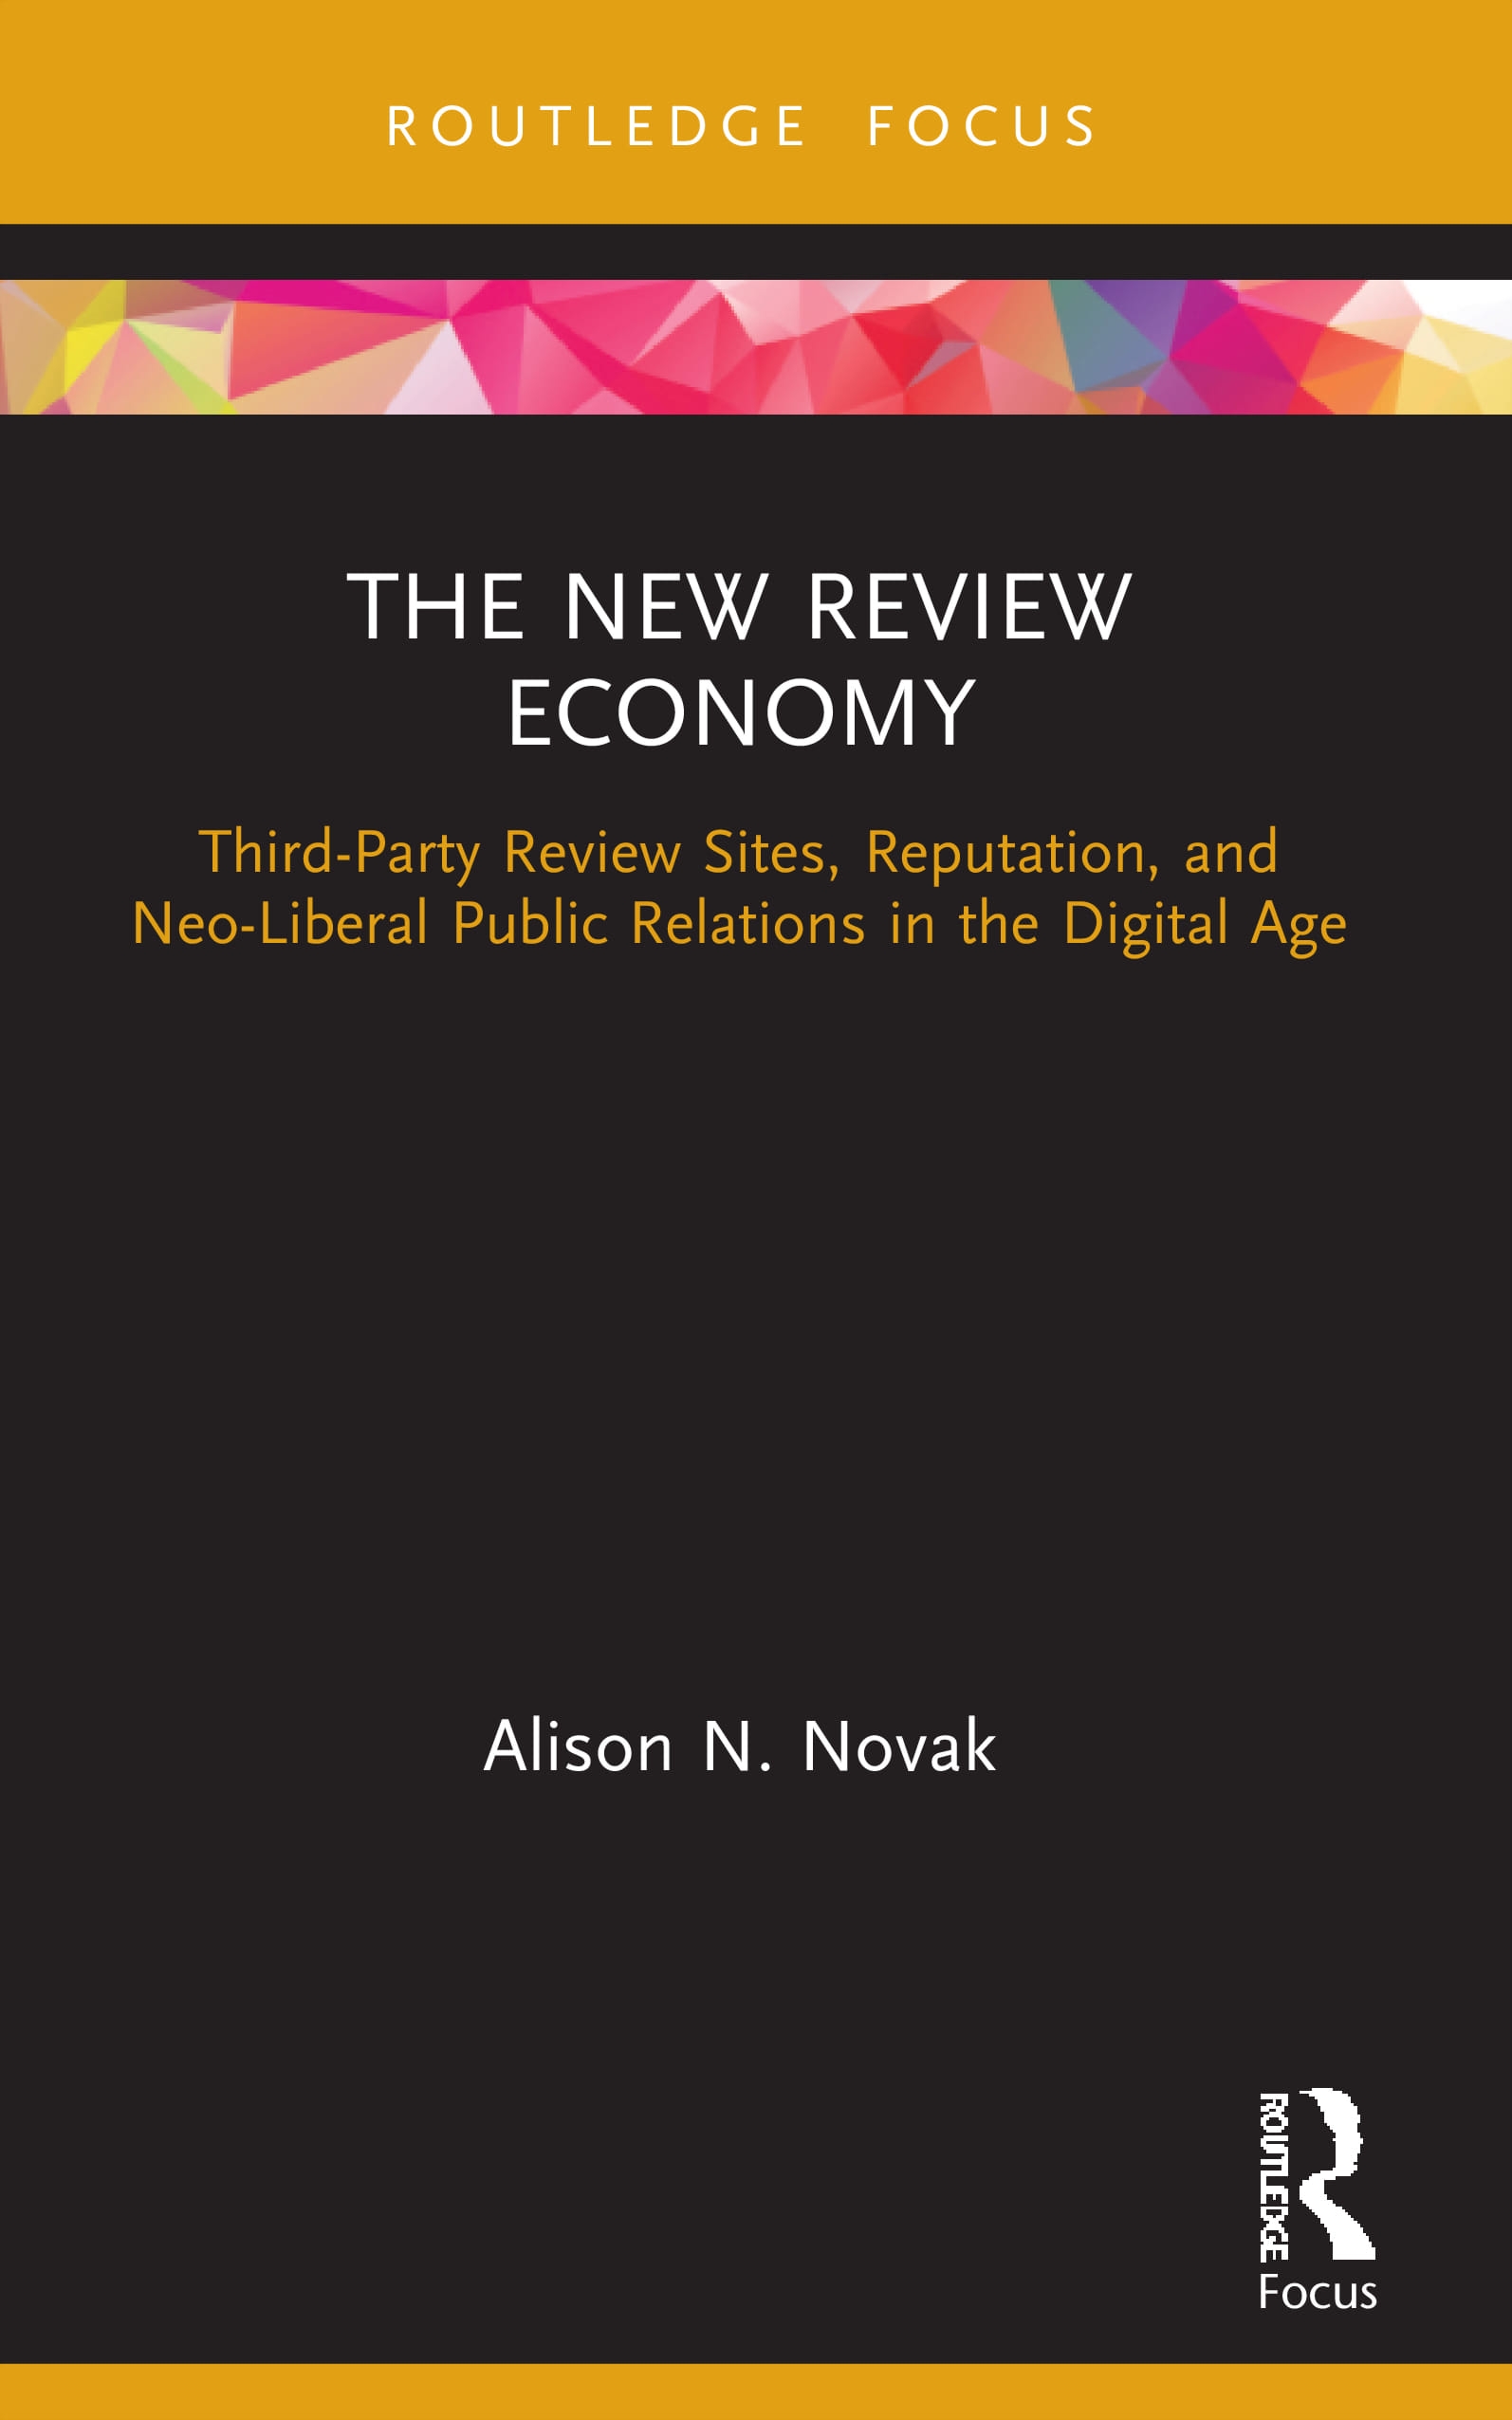 The New Review Economy: Third-Party Review Sites, Reputation, and Neo-Liberal Public Relations in the Digital Age